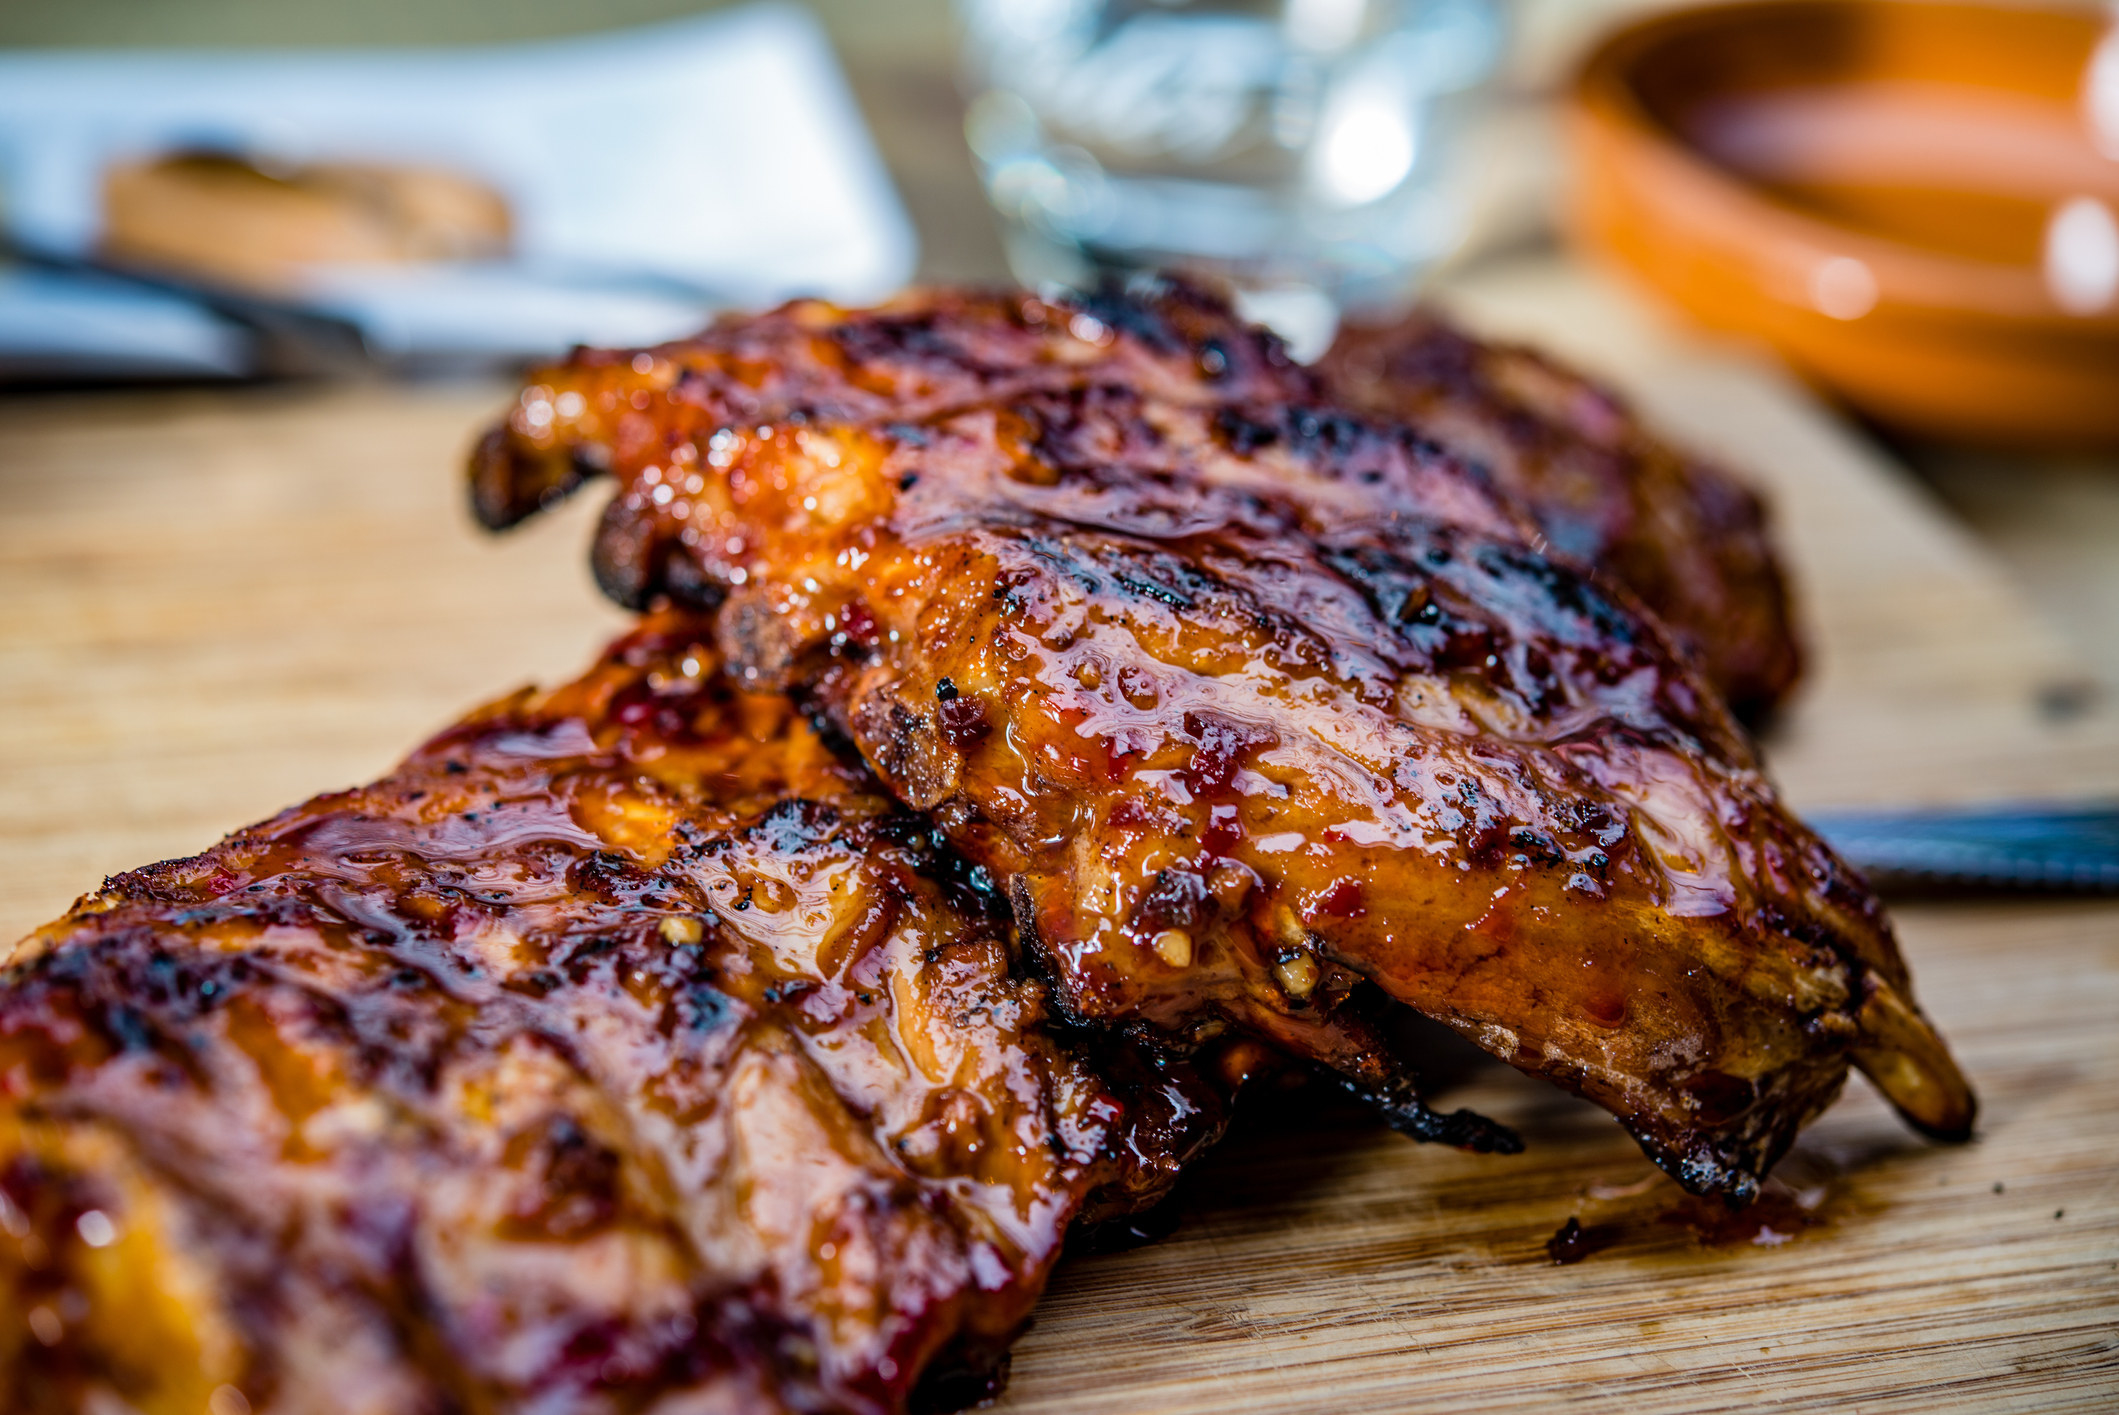 Spare ribs on a cutting board.